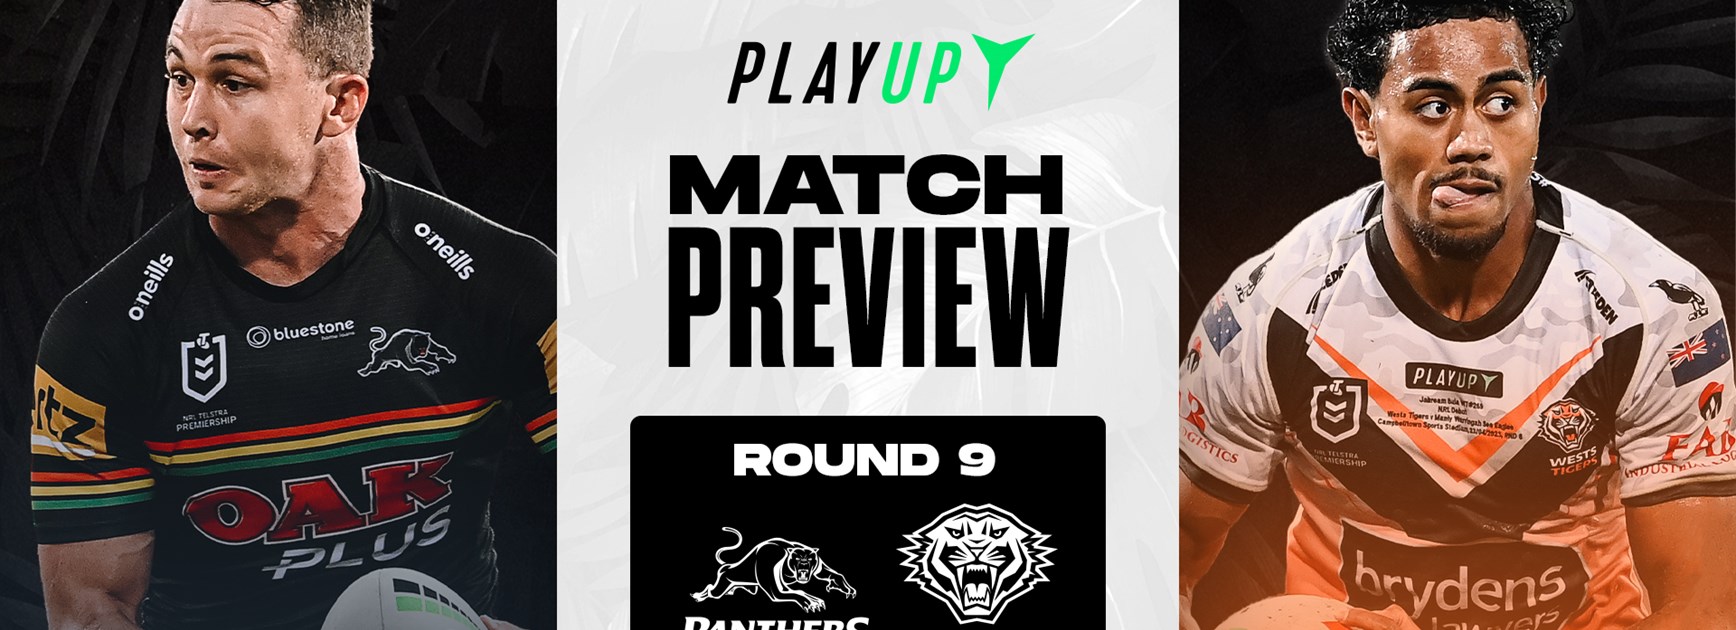 Match Preview: Round 9 vs Panthers